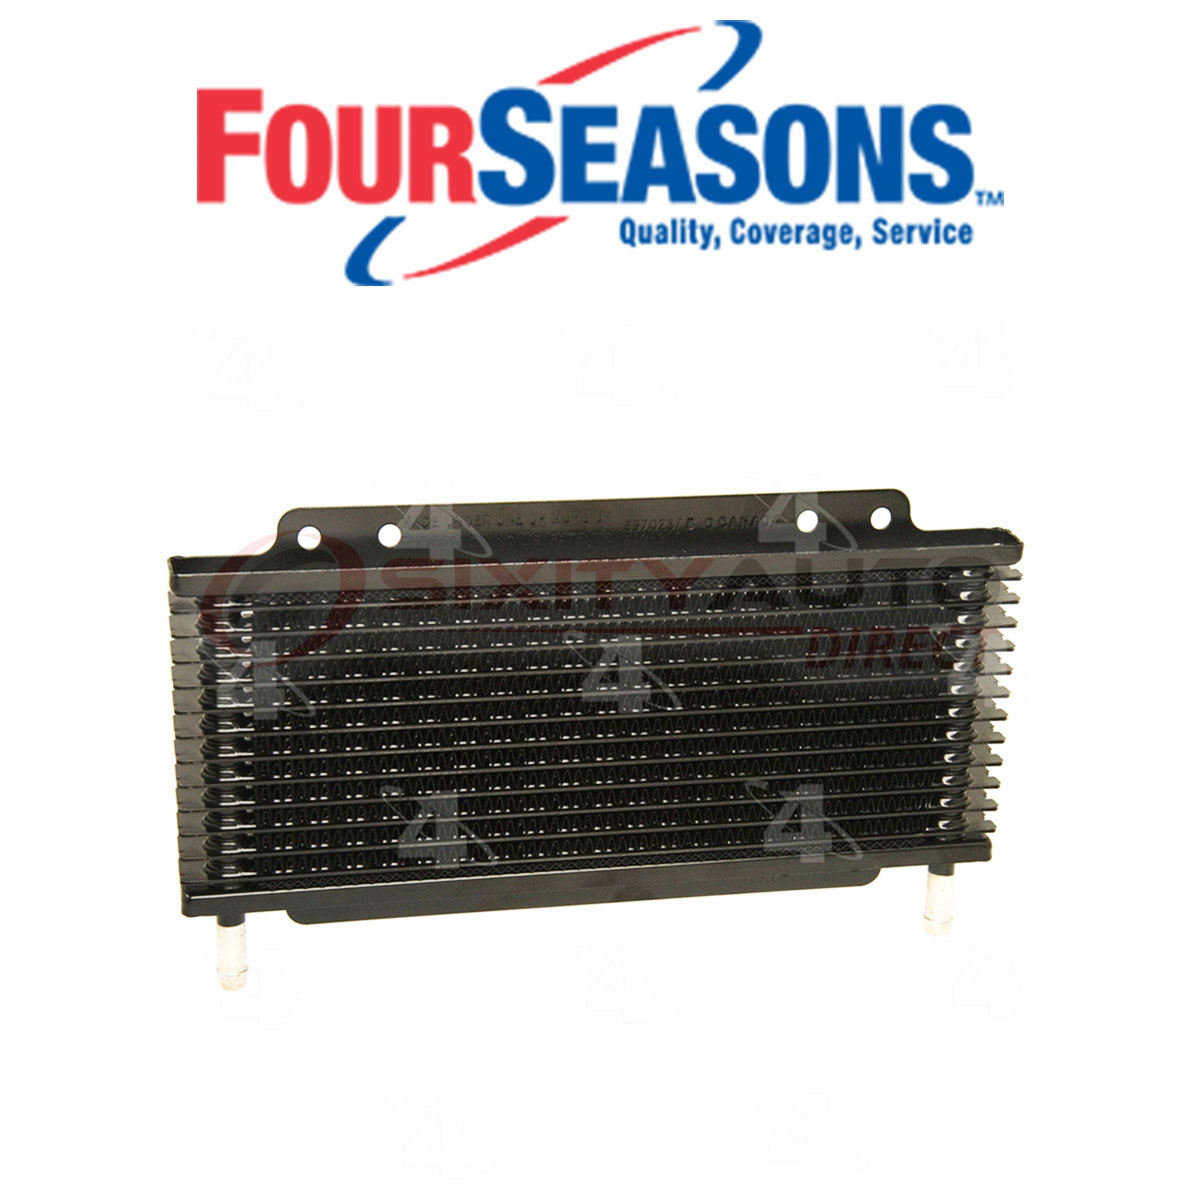 2008 Ford Taurus X Transmission Cooler Replacement